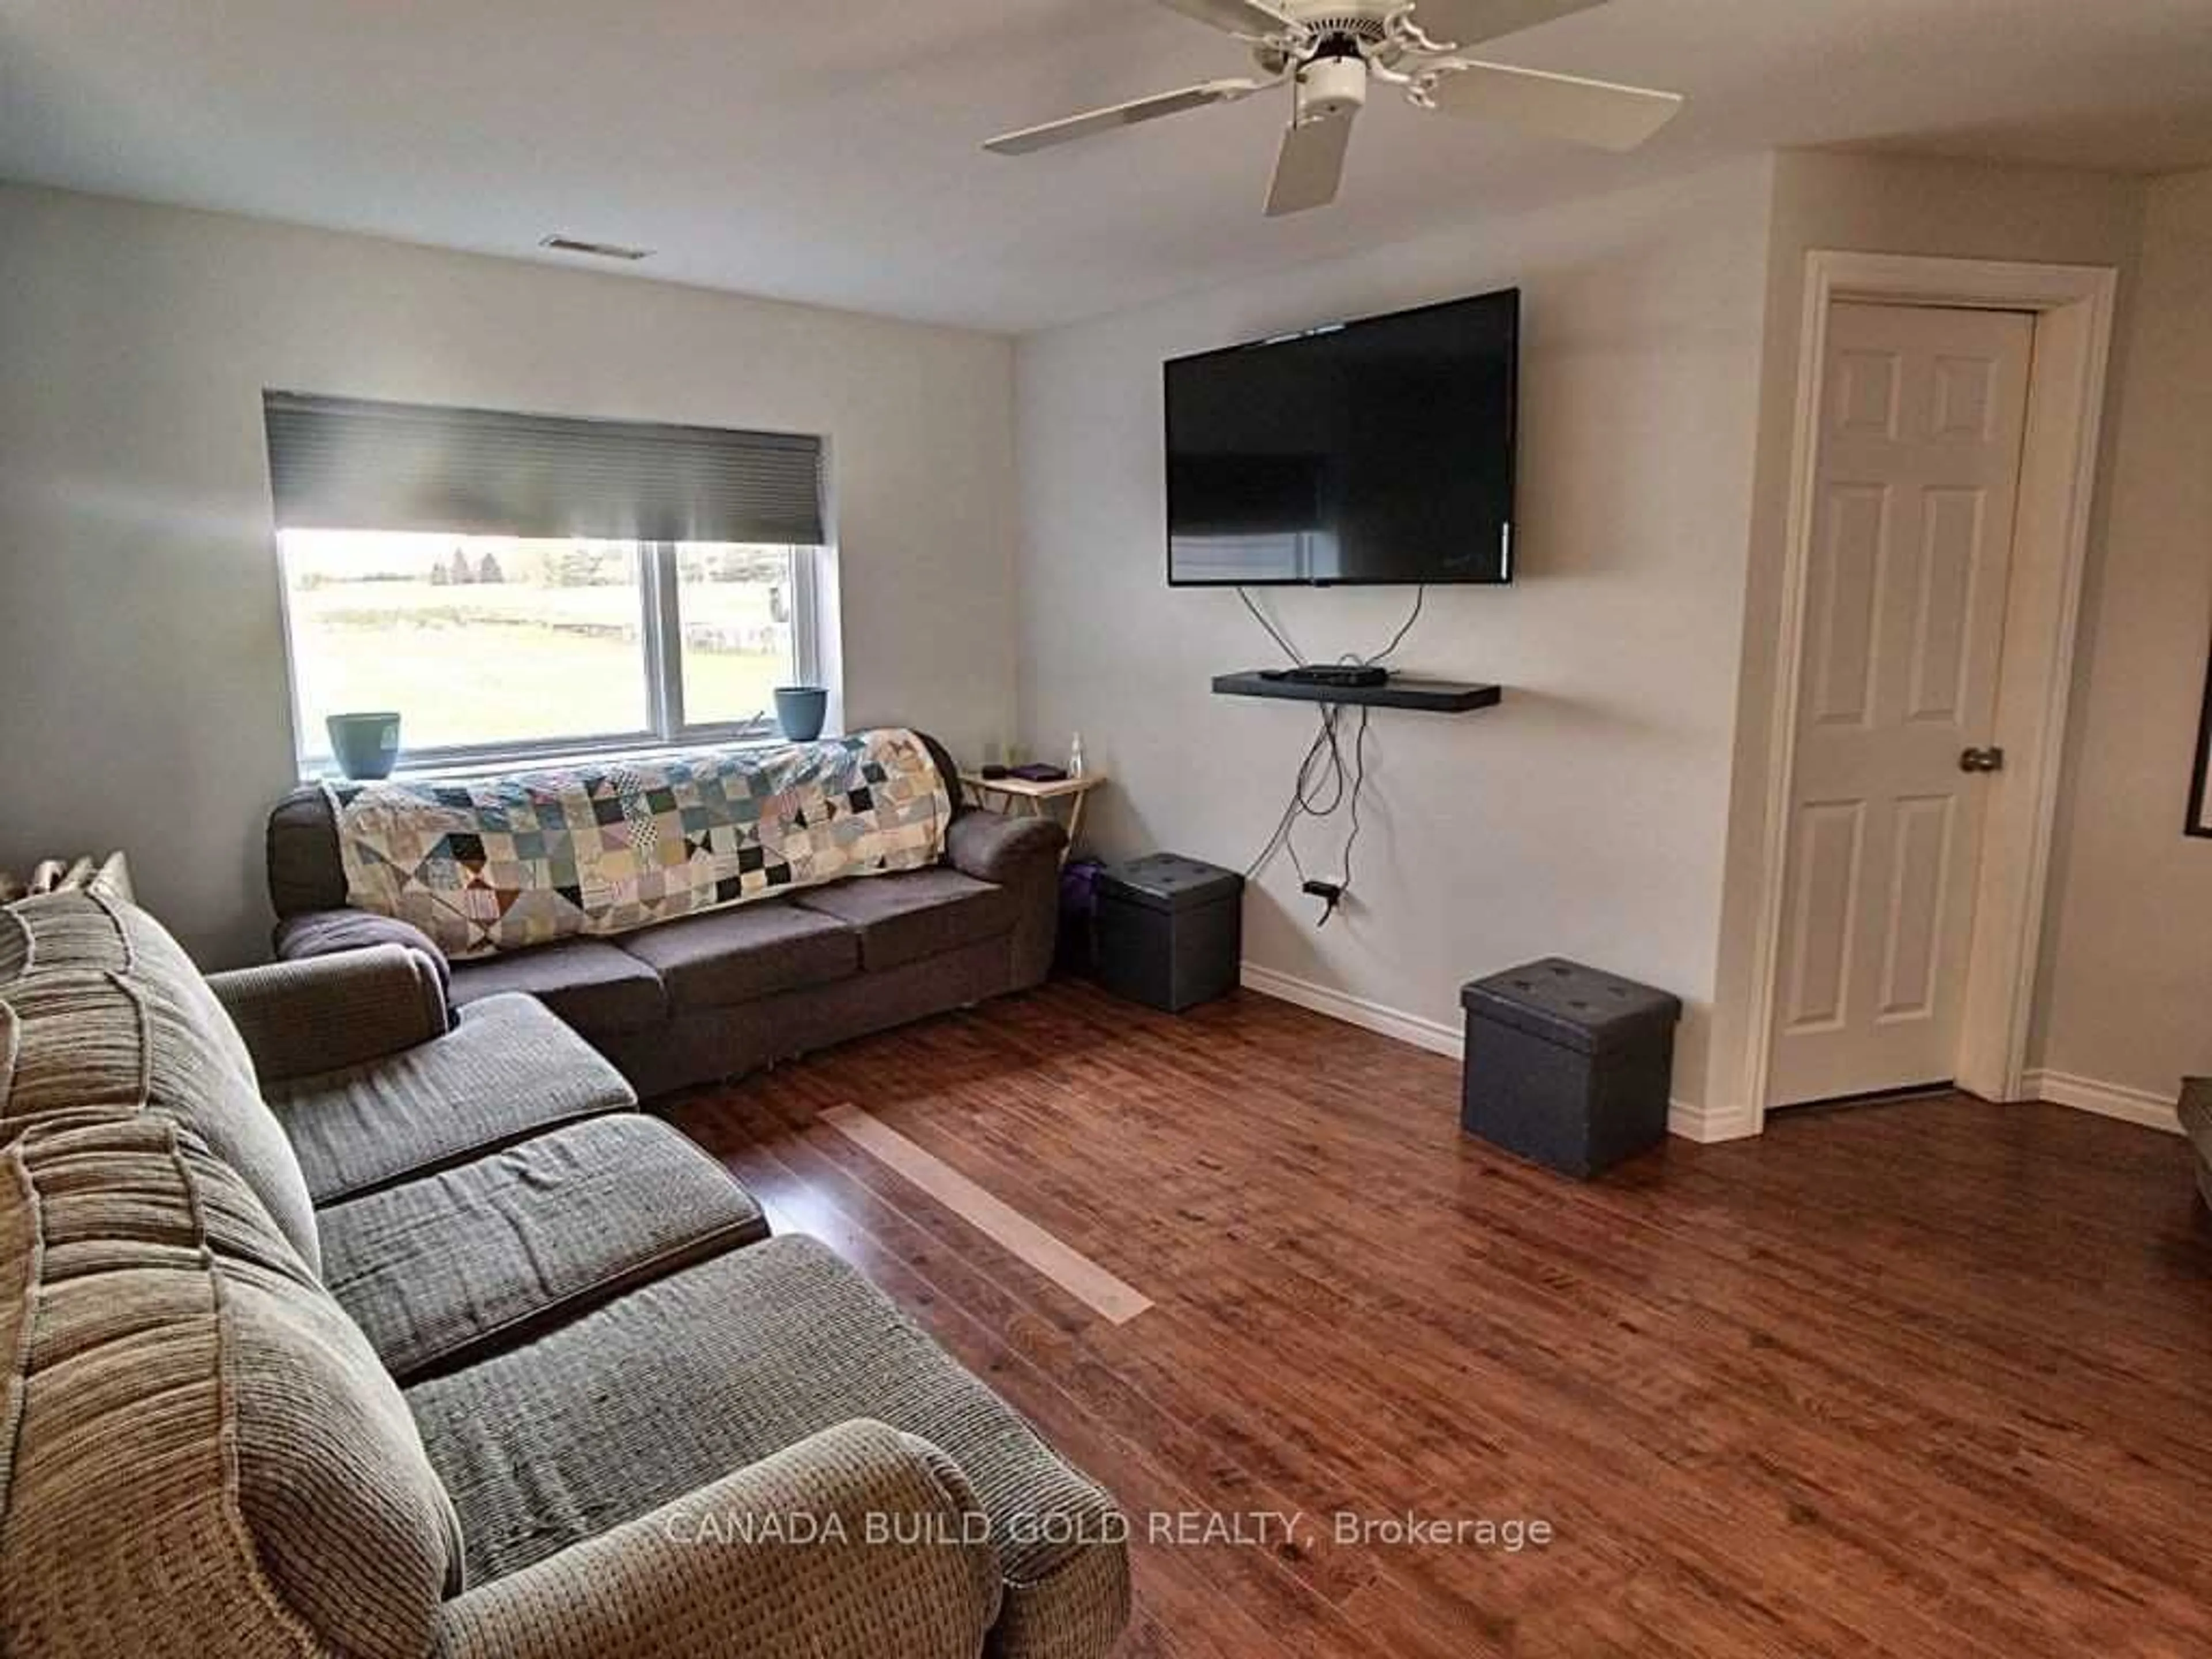 A pic of a room for 5109 Wellington Rd, London Ontario N6E 3Y1